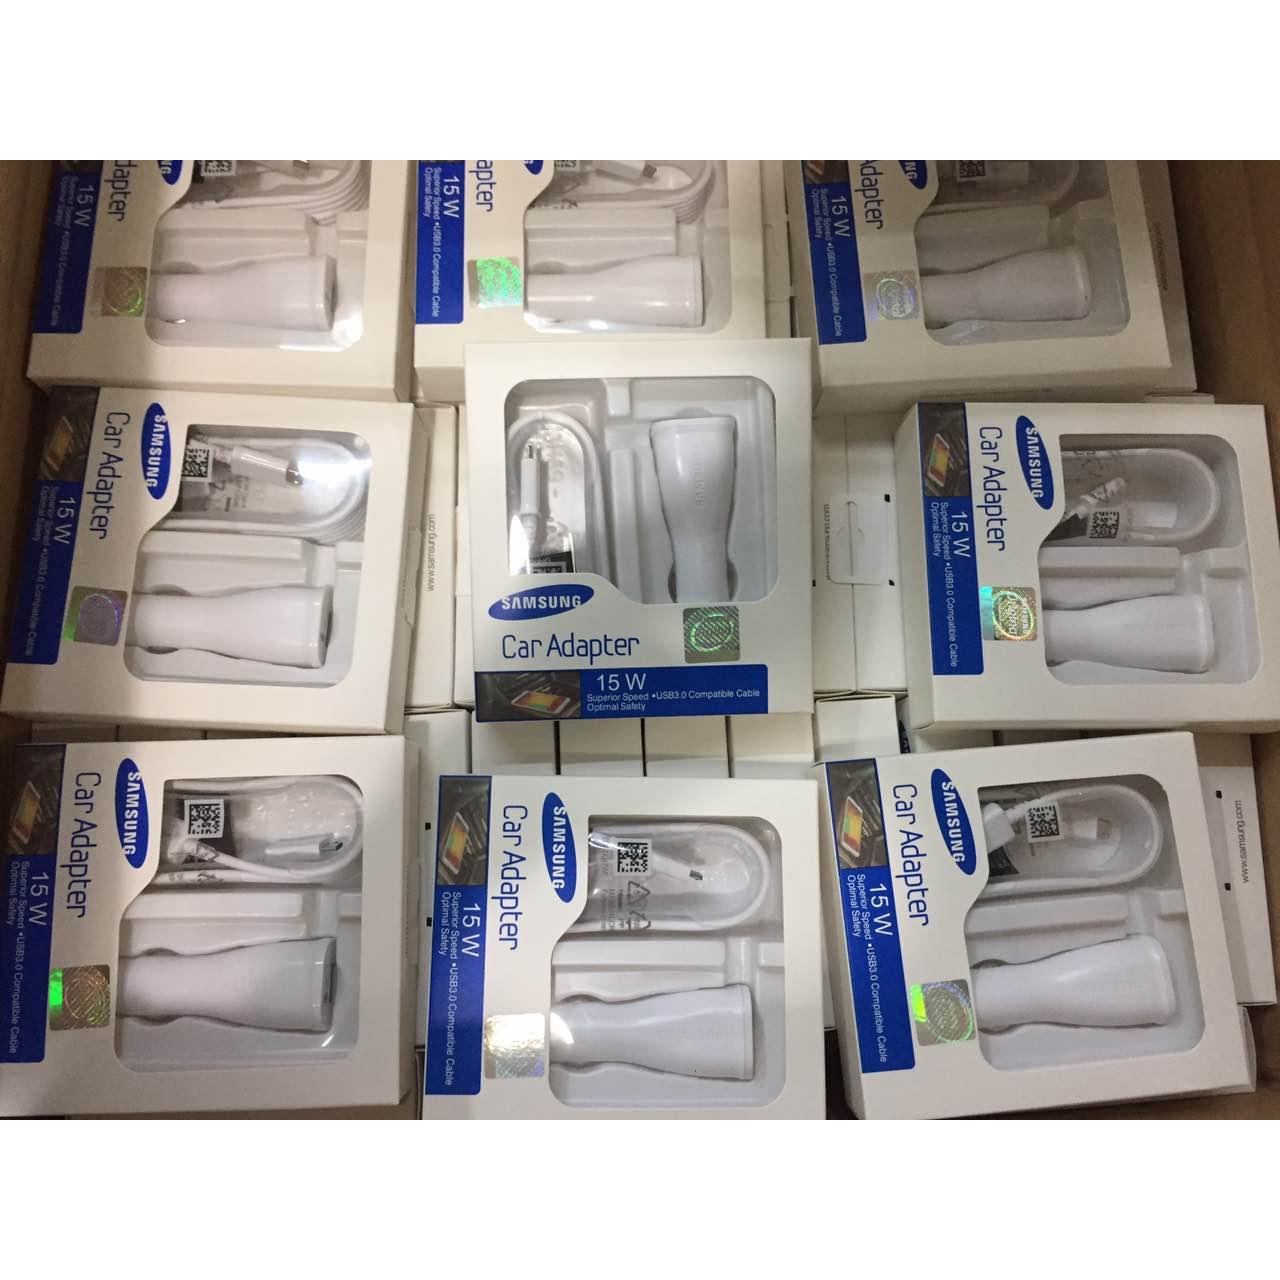 Samsung Samsung 15W Car Adapter Wholesale Suppliers